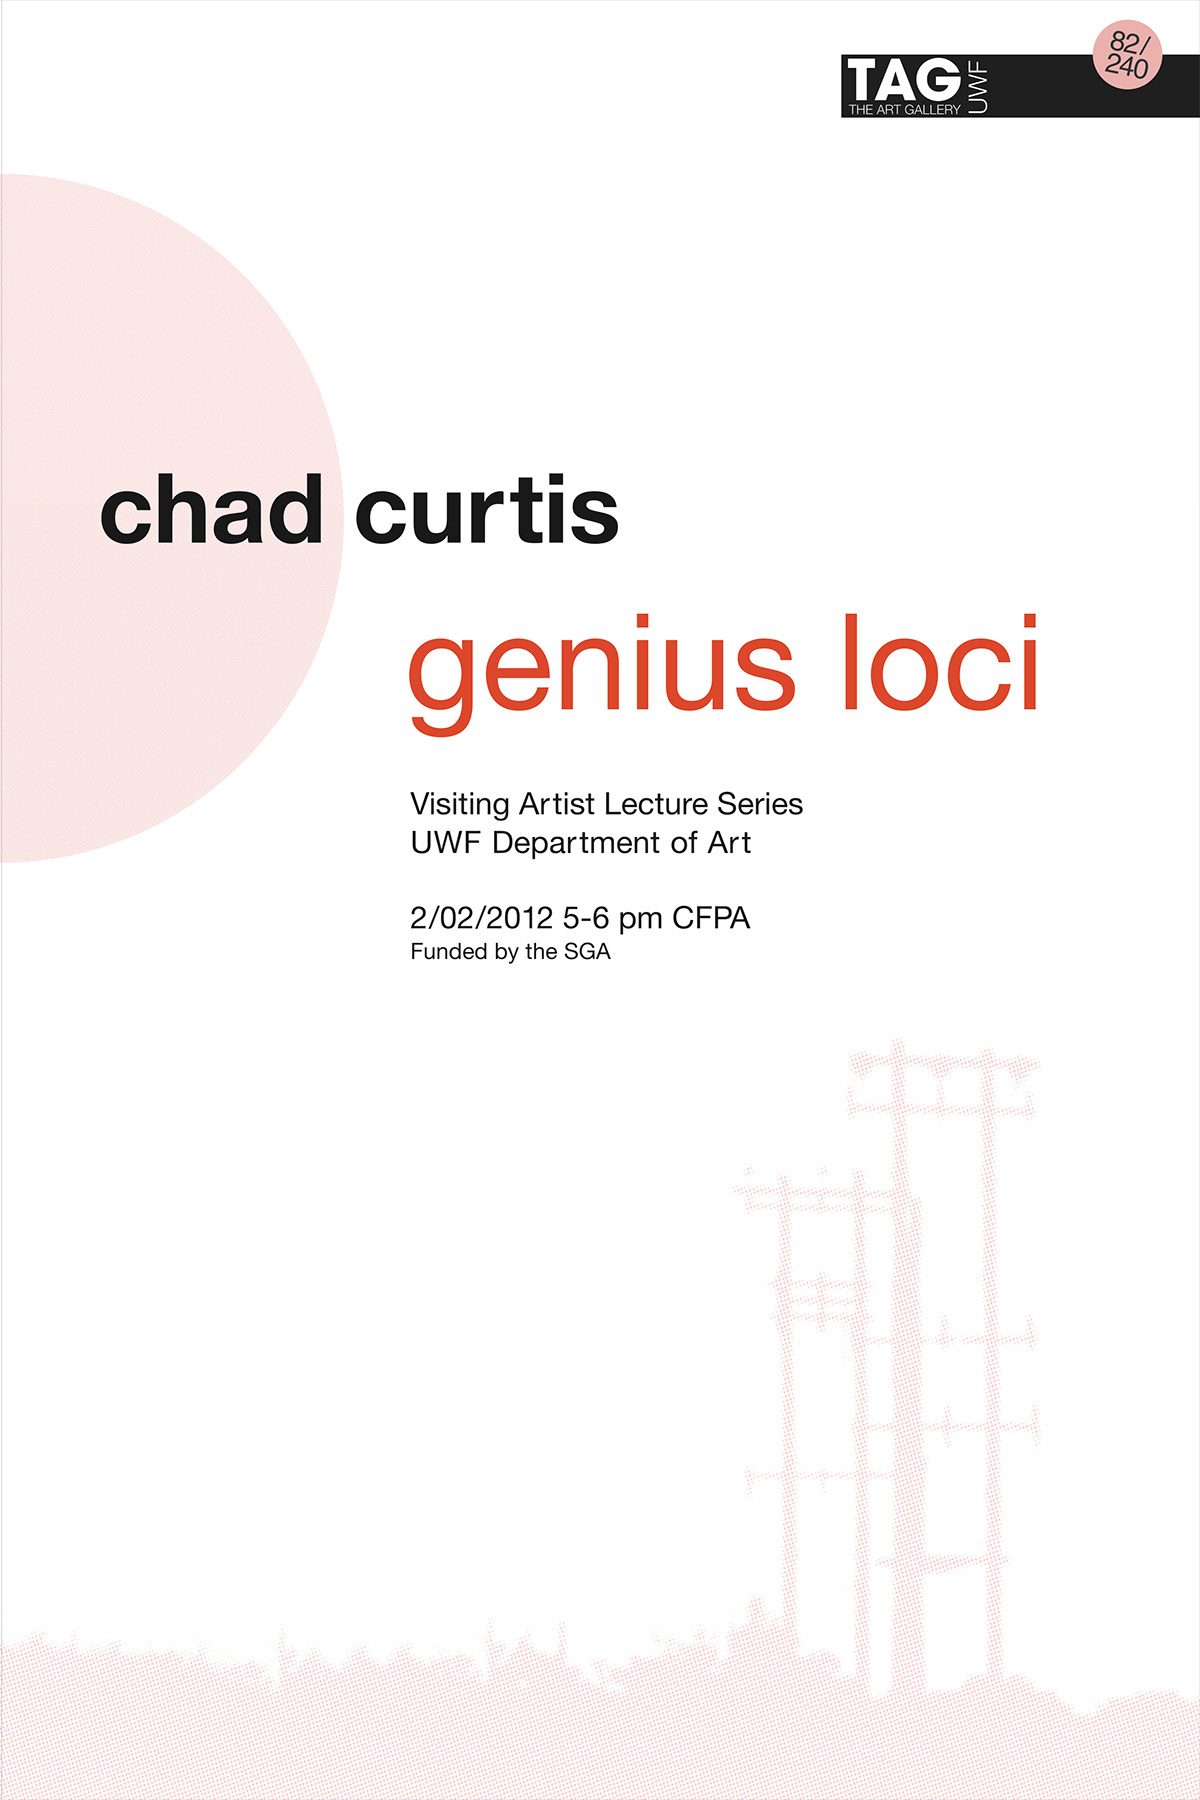 Chad Curtis all natural gallery tag Installation Art sculpture